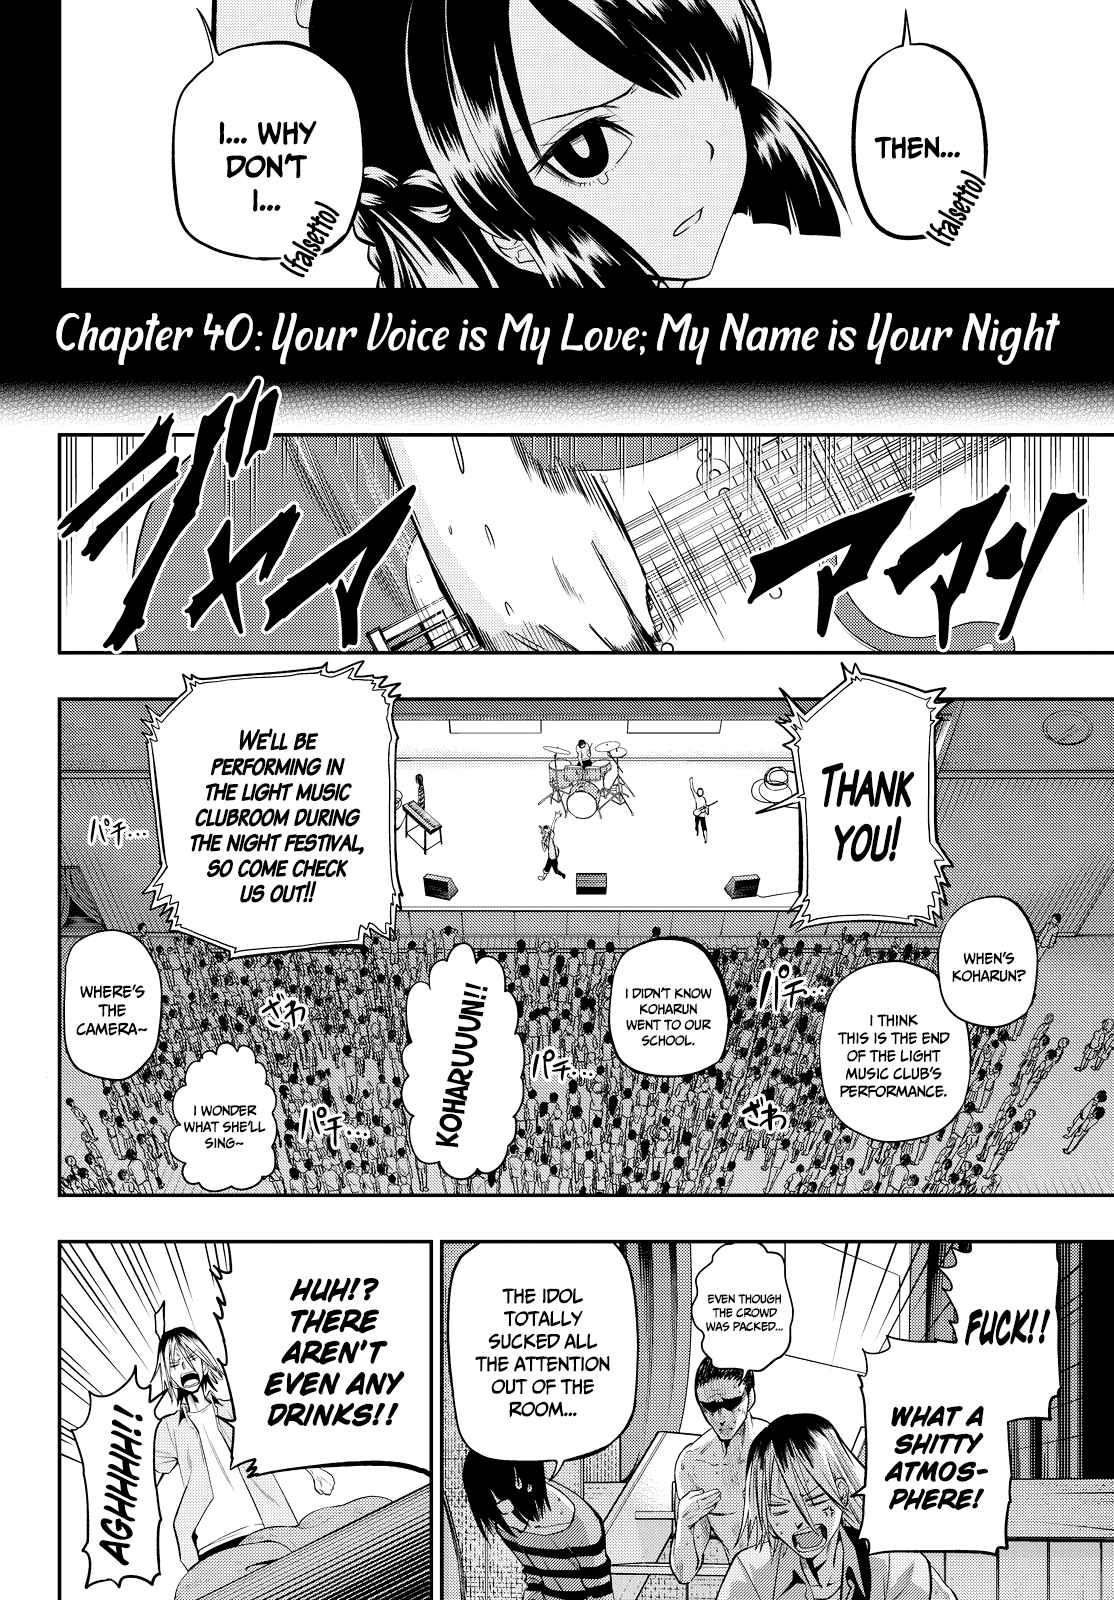 Hoshino, Me O Tsubutte Vol. 5 Ch. 40 Your Voice is My Love, My Name is Your Night